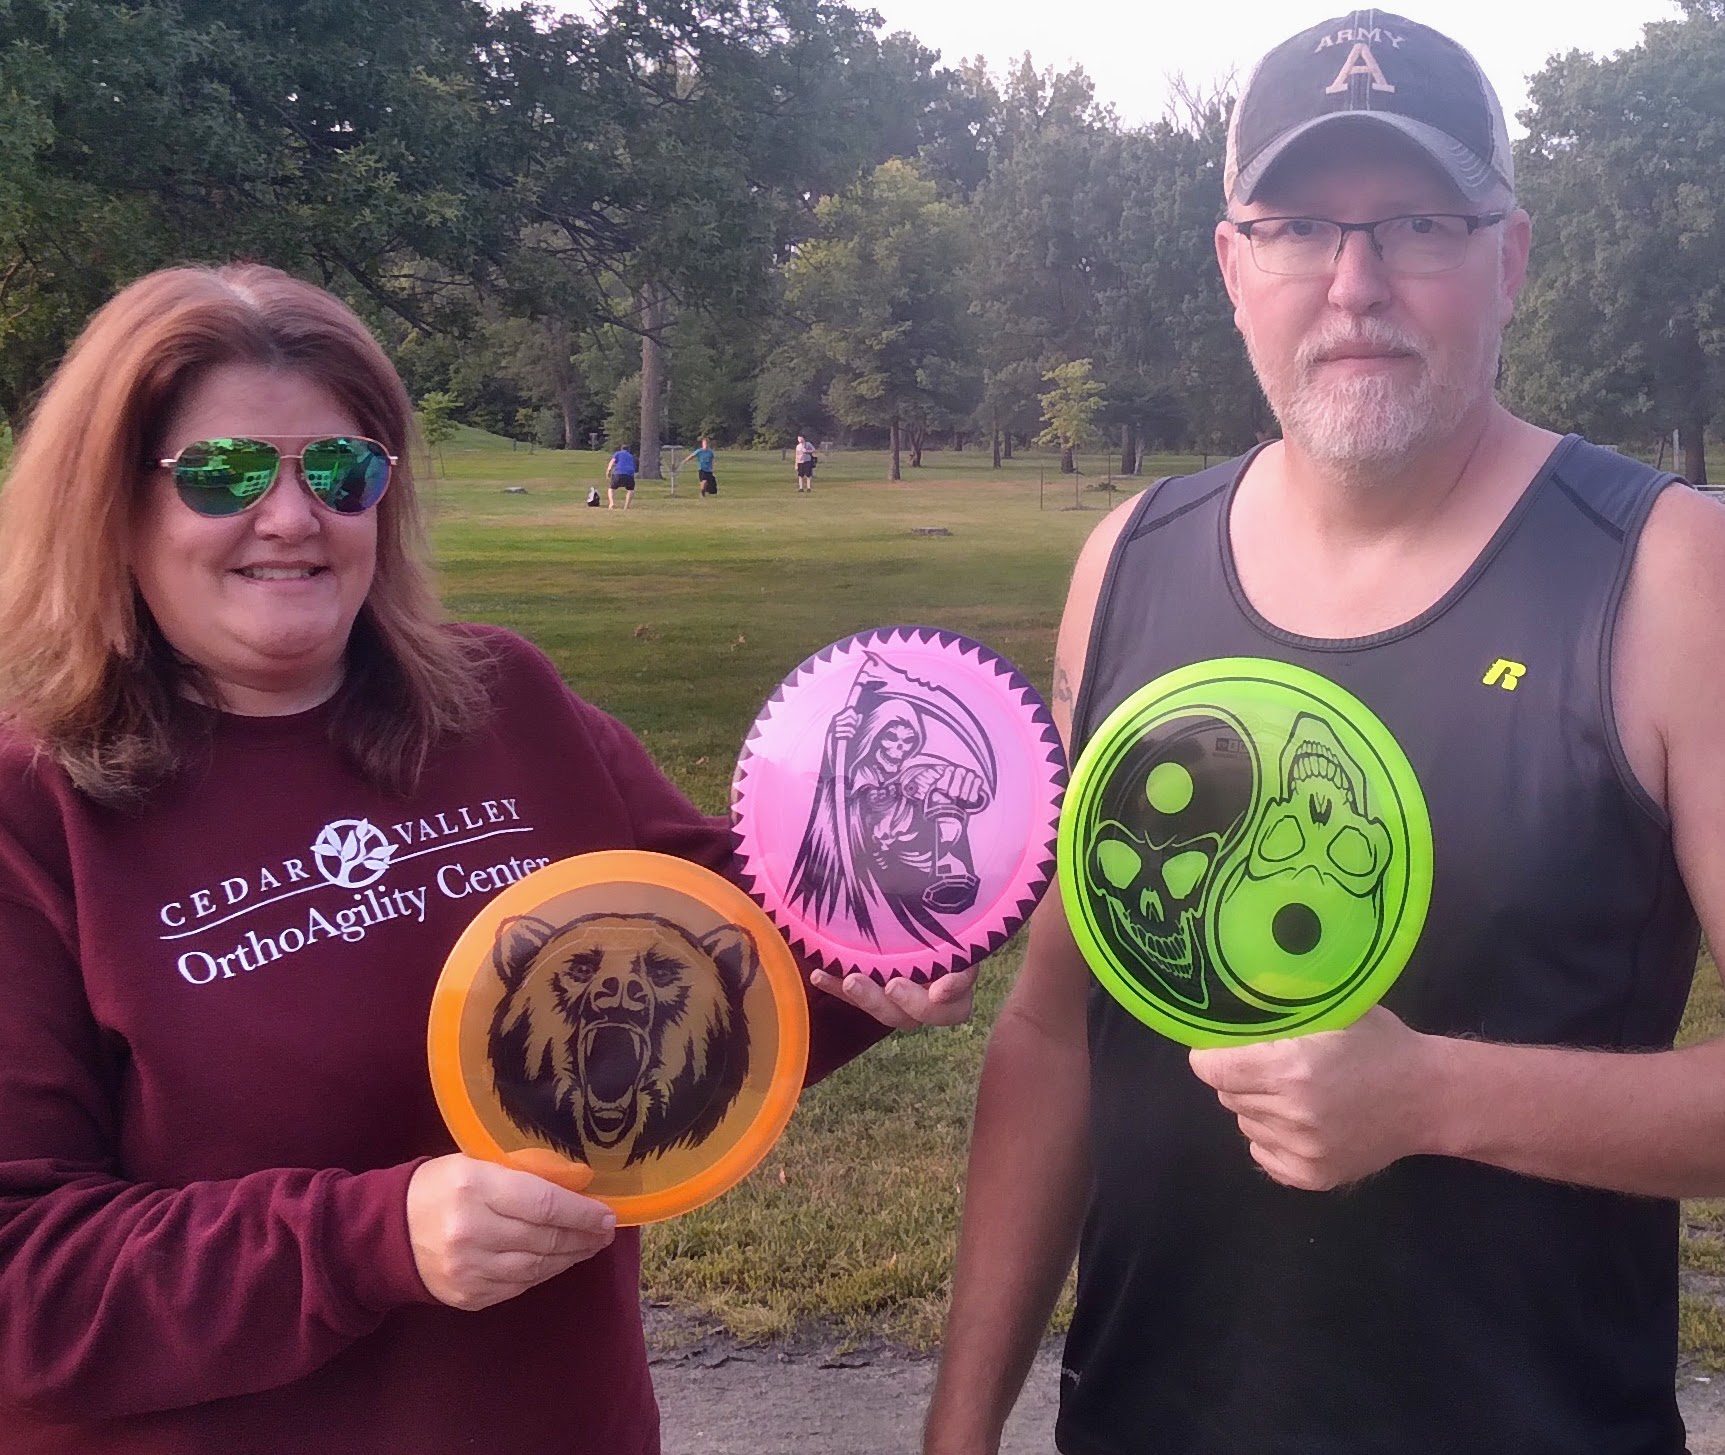 Diane and Mark love scary customdisc golf dyes